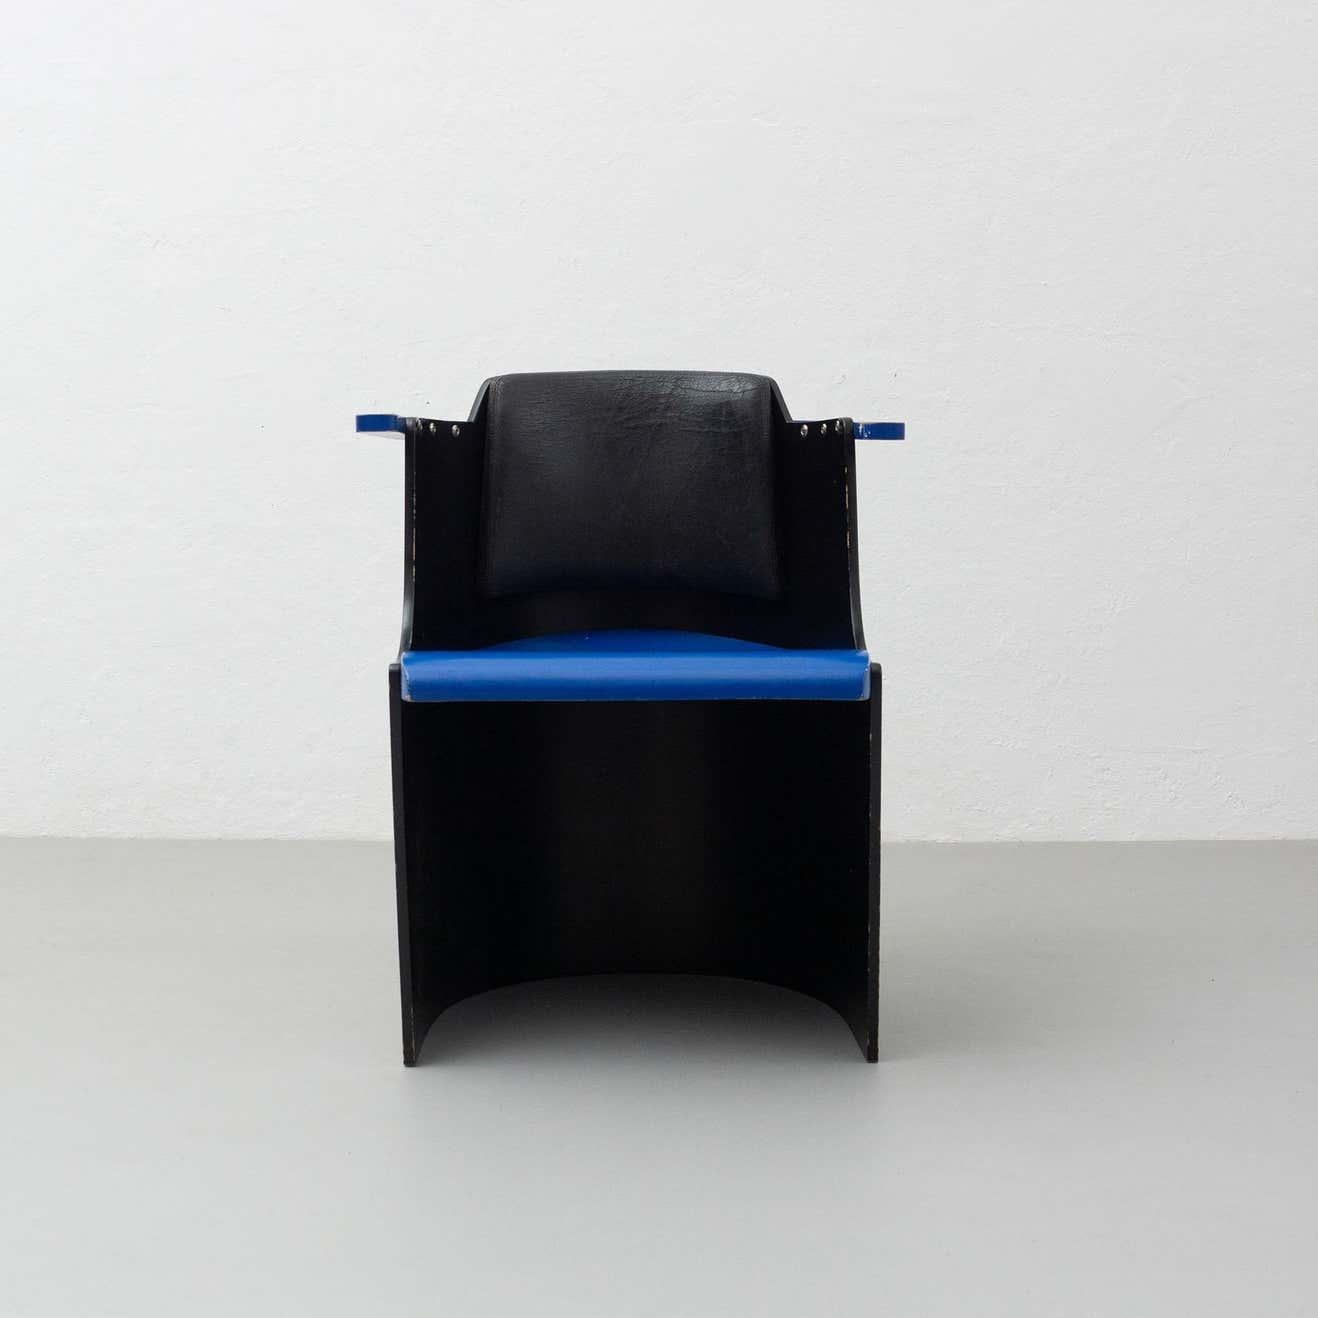 Chair model D61, designed by El Lissitzky in 1930.
Manufactured in Germany by Tecta, circa 1970.

In original condition, with minor wear consistent with age and use, preserving a beautiful patina.

Materials:
Wood
Leather

Dimensions:
D 51